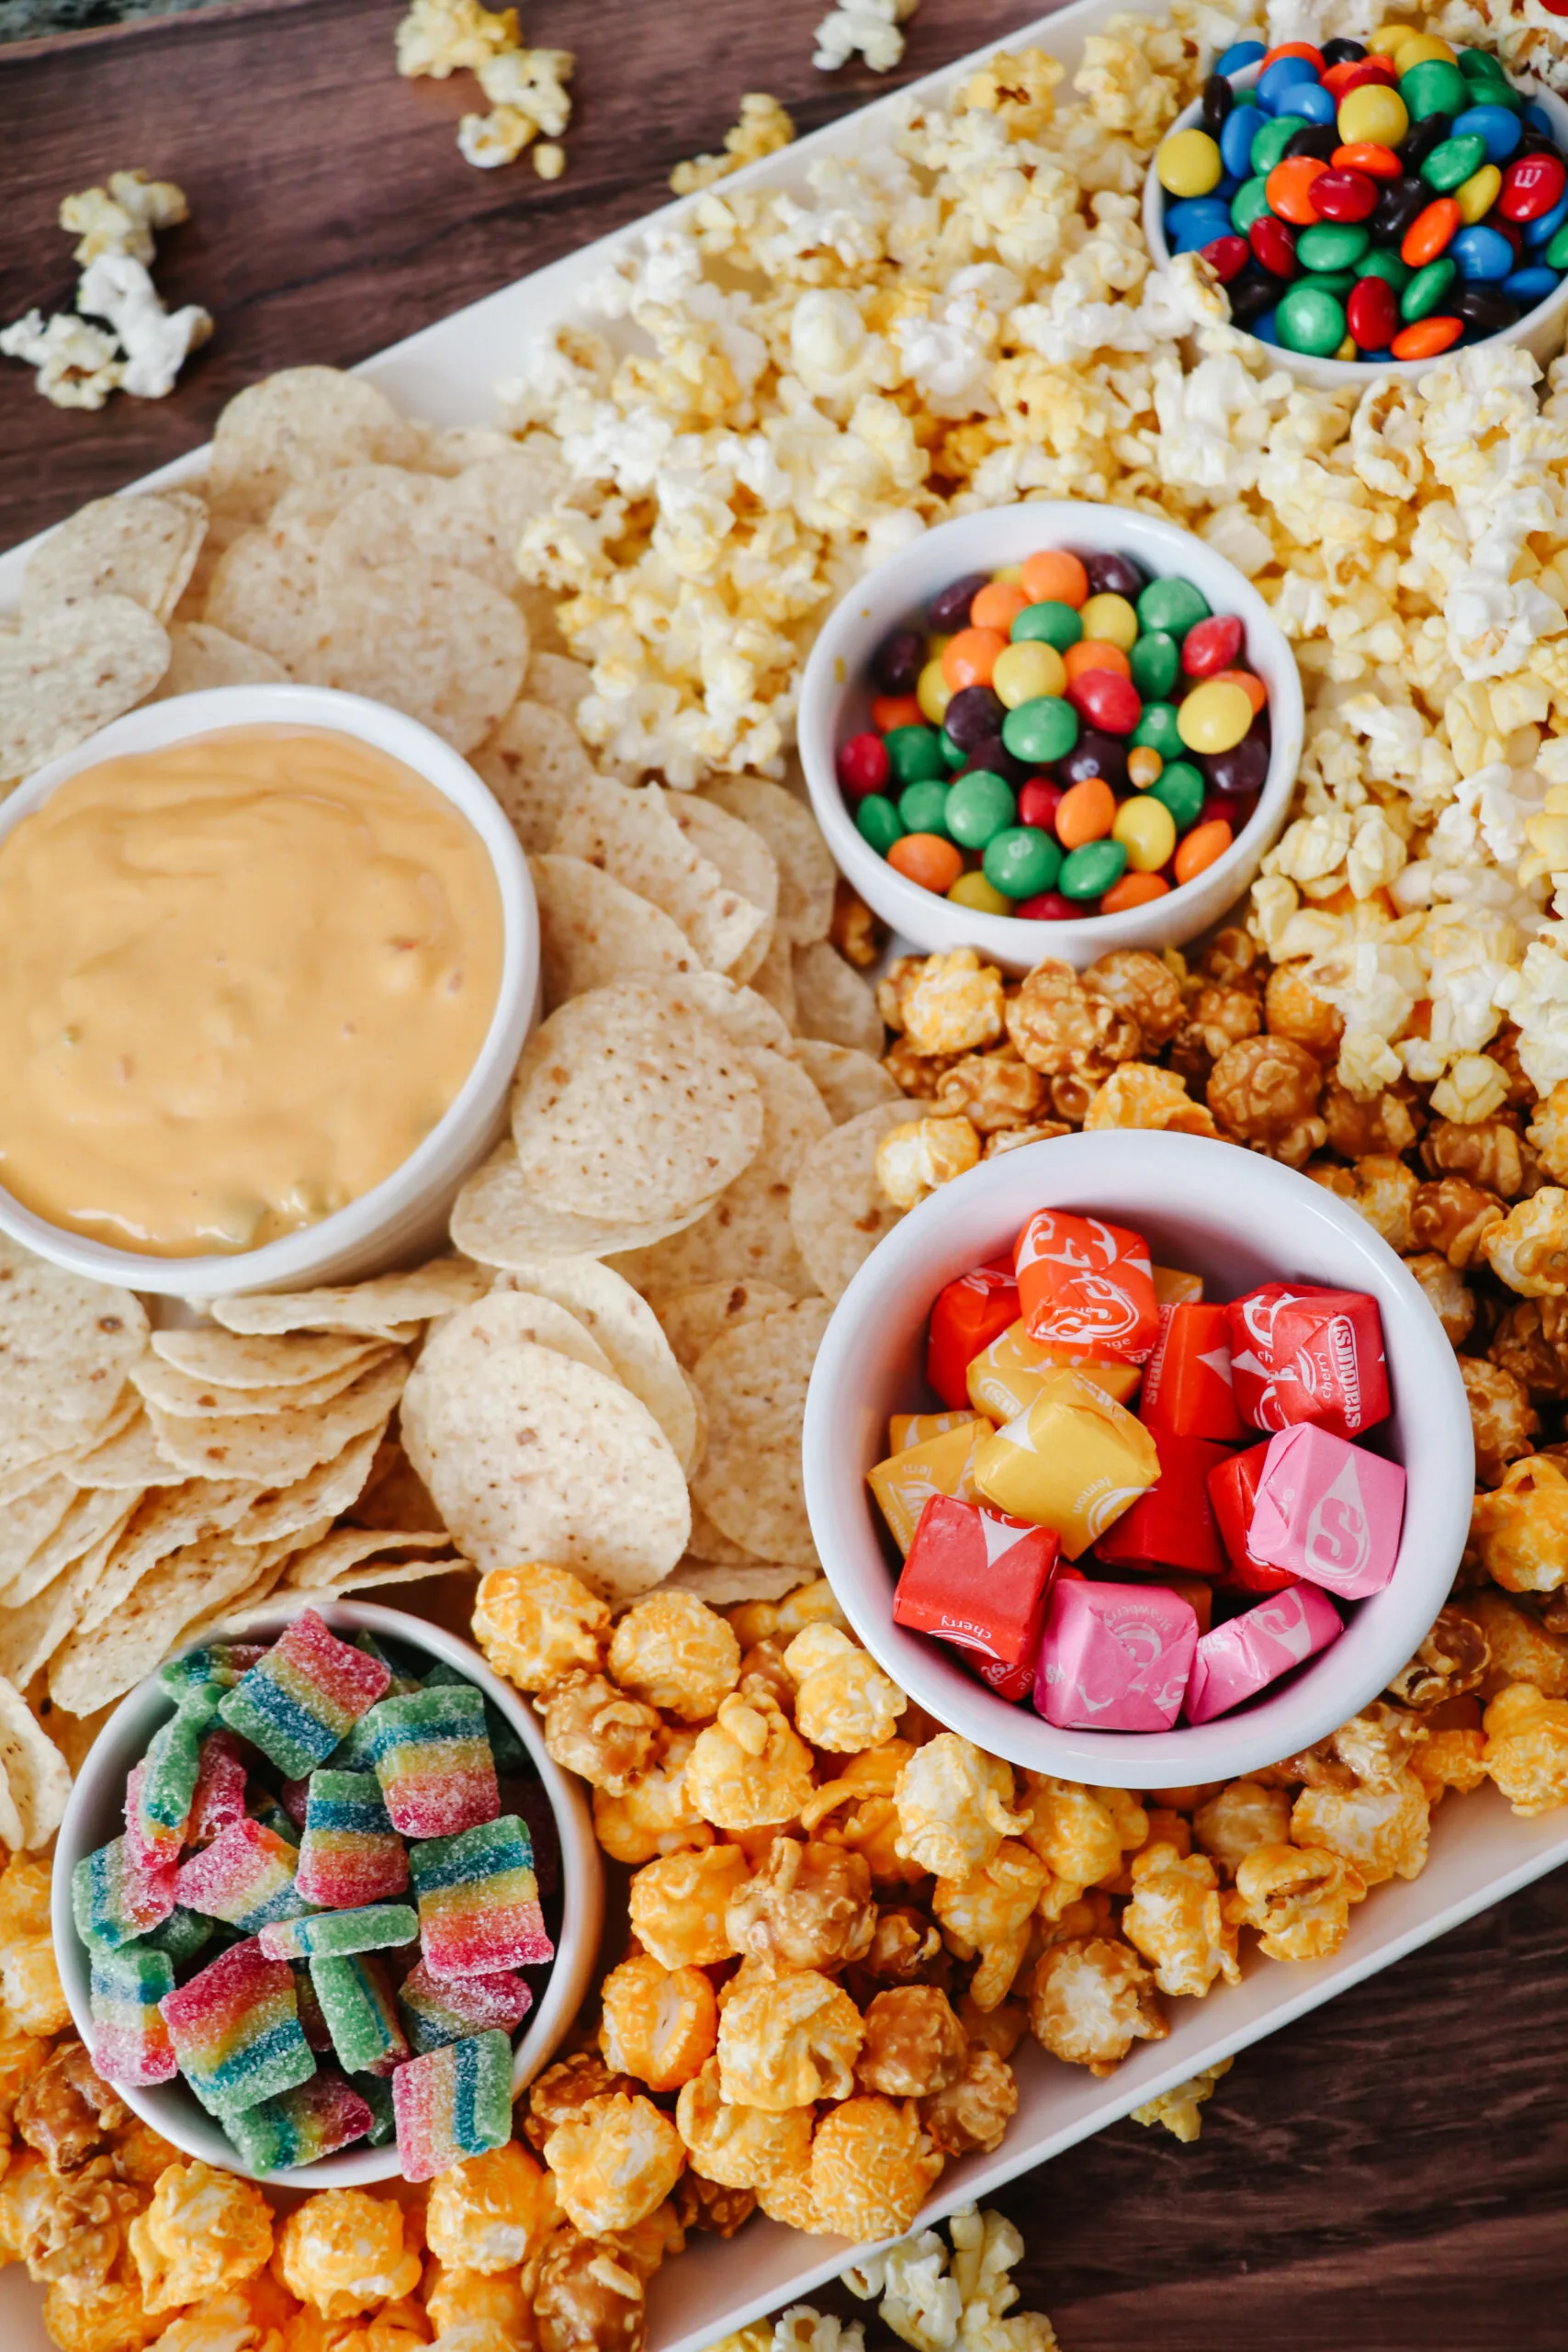 https://www.thedenverhousewife.com/wp-content/uploads/2021/12/Movie-Night-Snack-Tray-scaled.jpg.webp